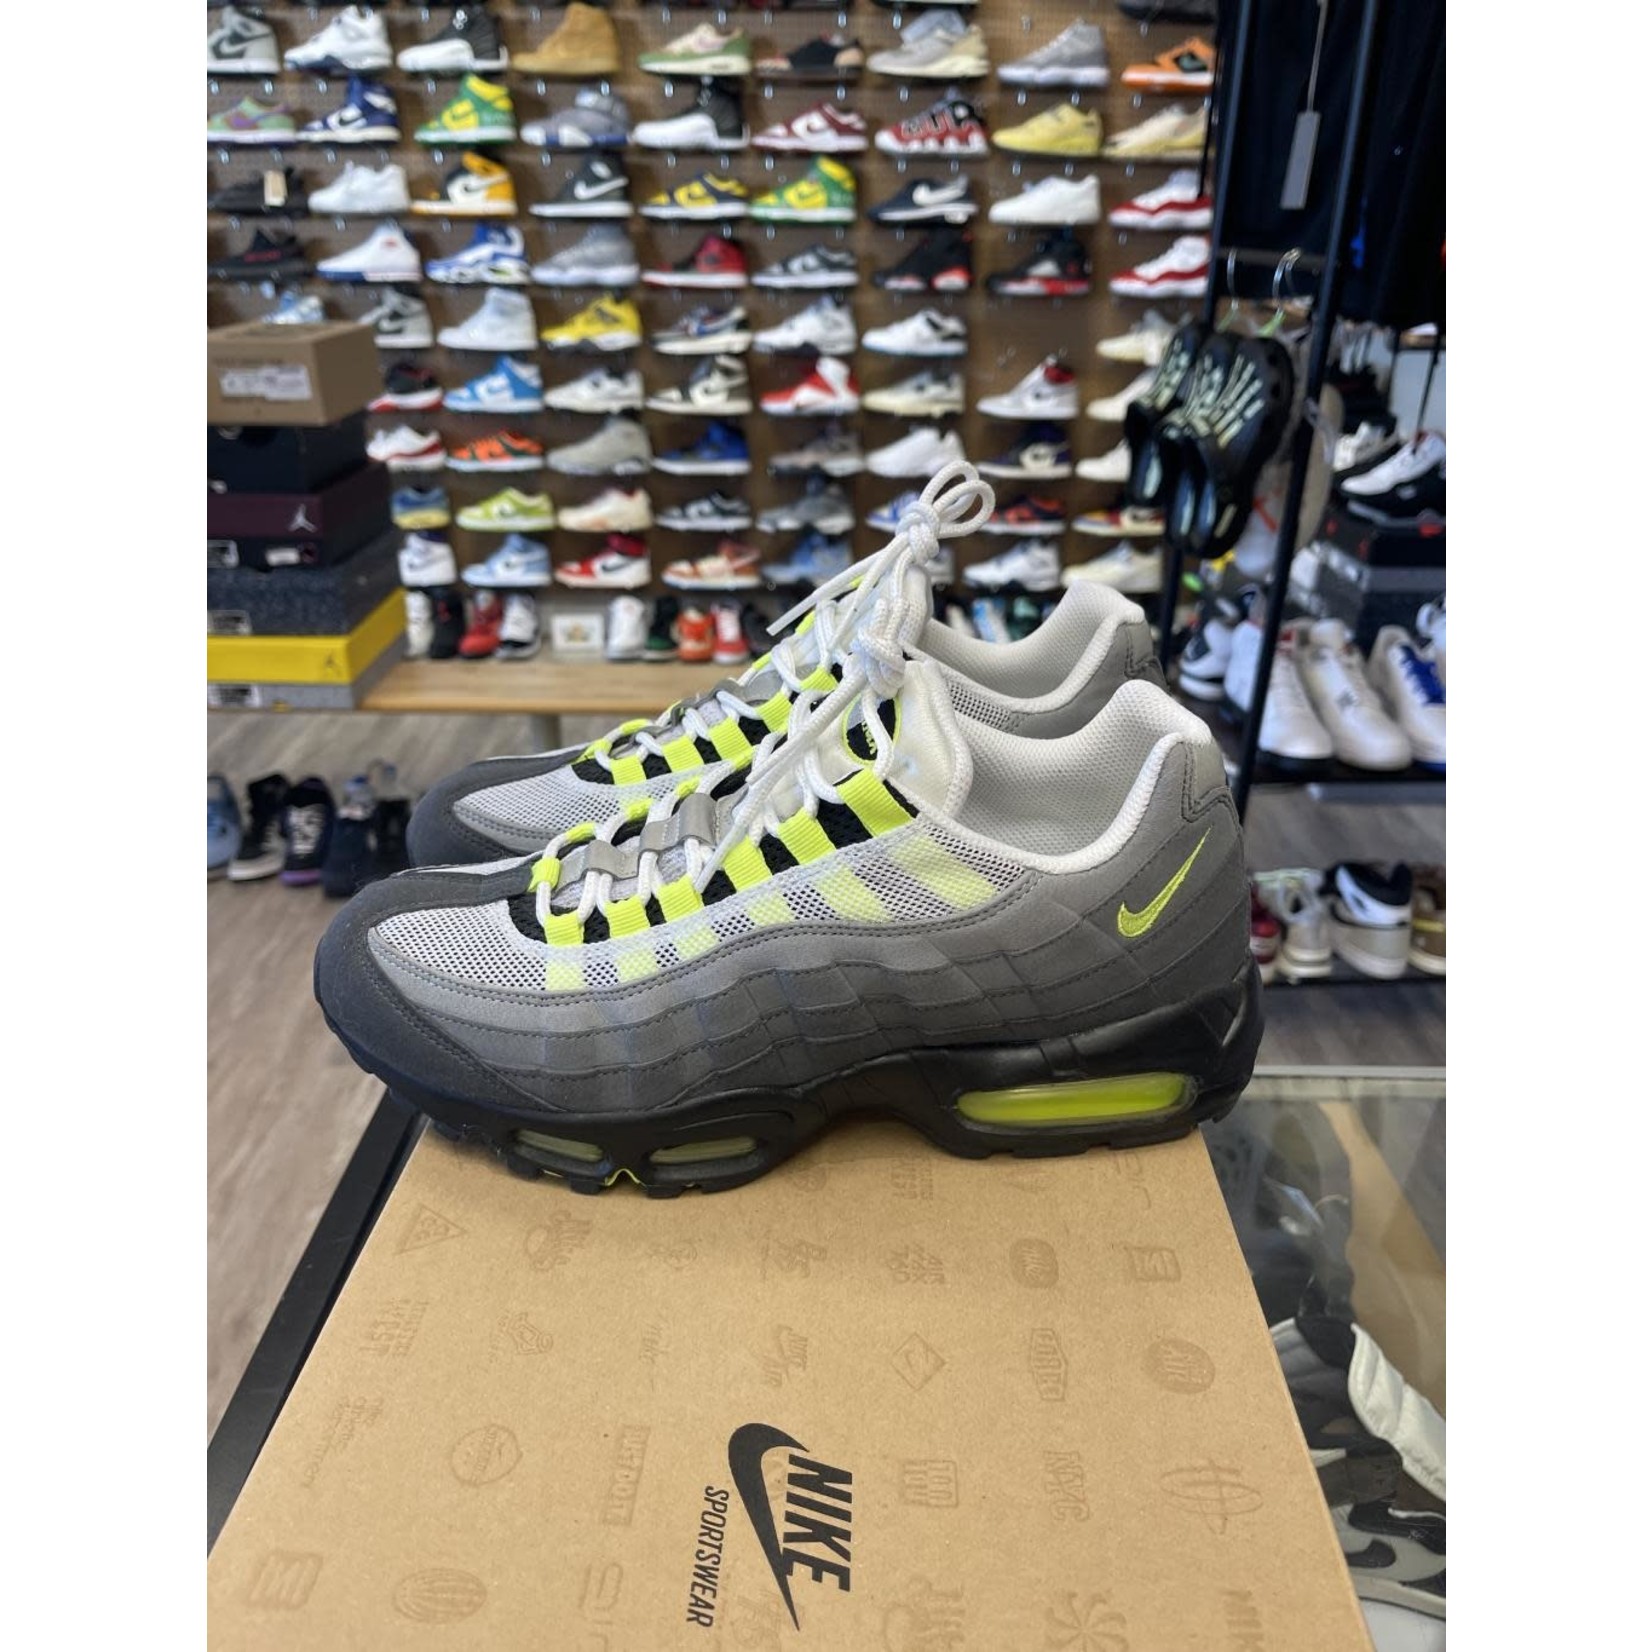 Nike Nike Air Max 95 OG Neon (2012) Size 9, PREOWNED